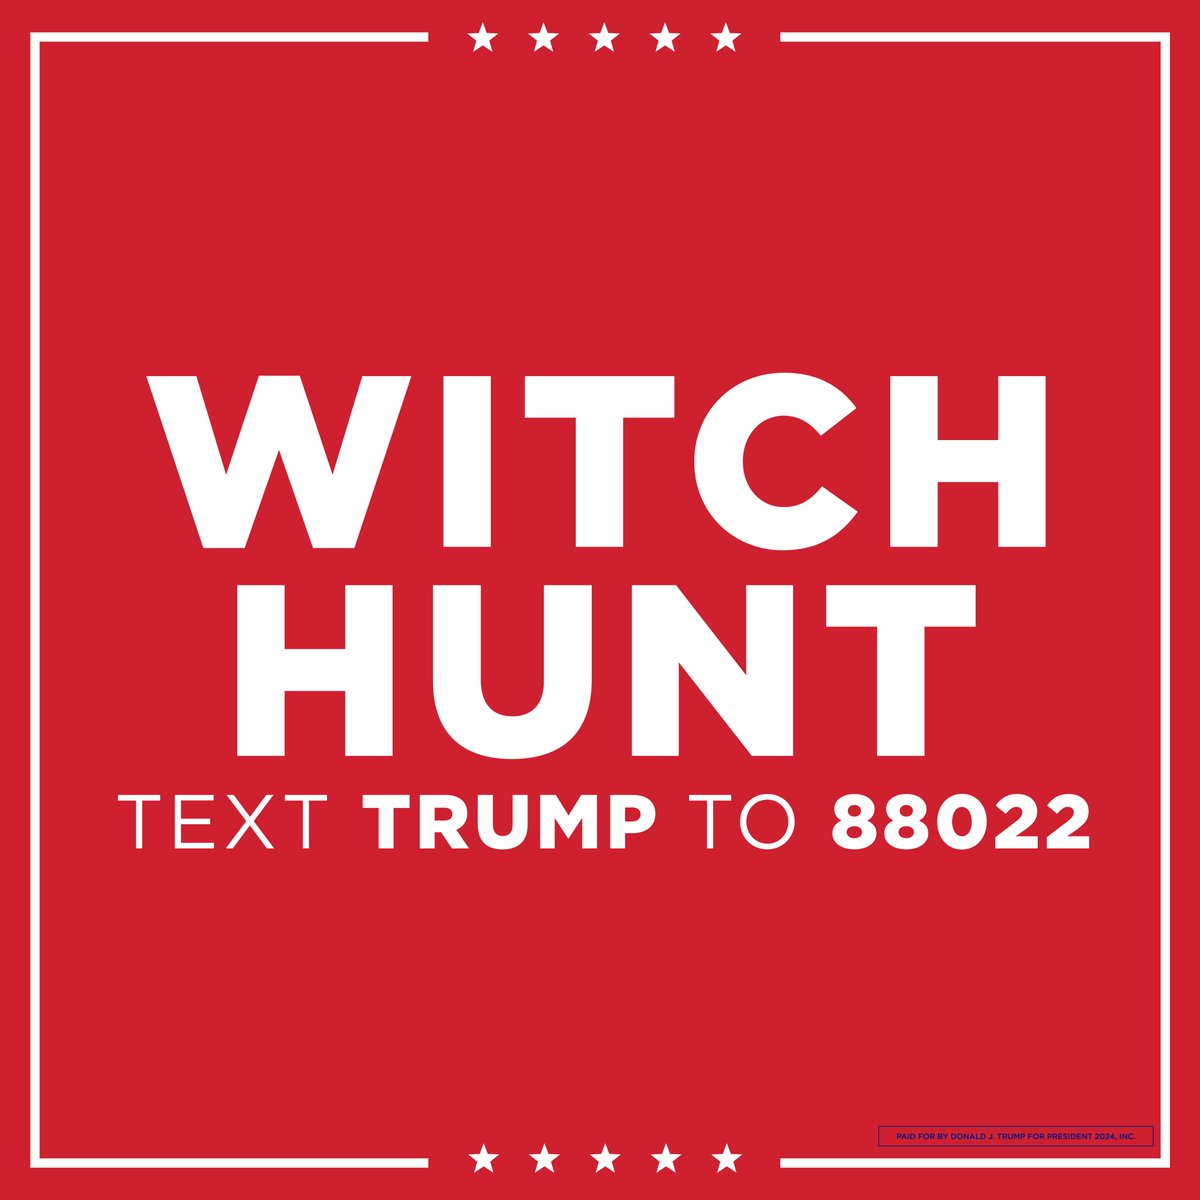 WITCH HUNT! #StandWithTrump